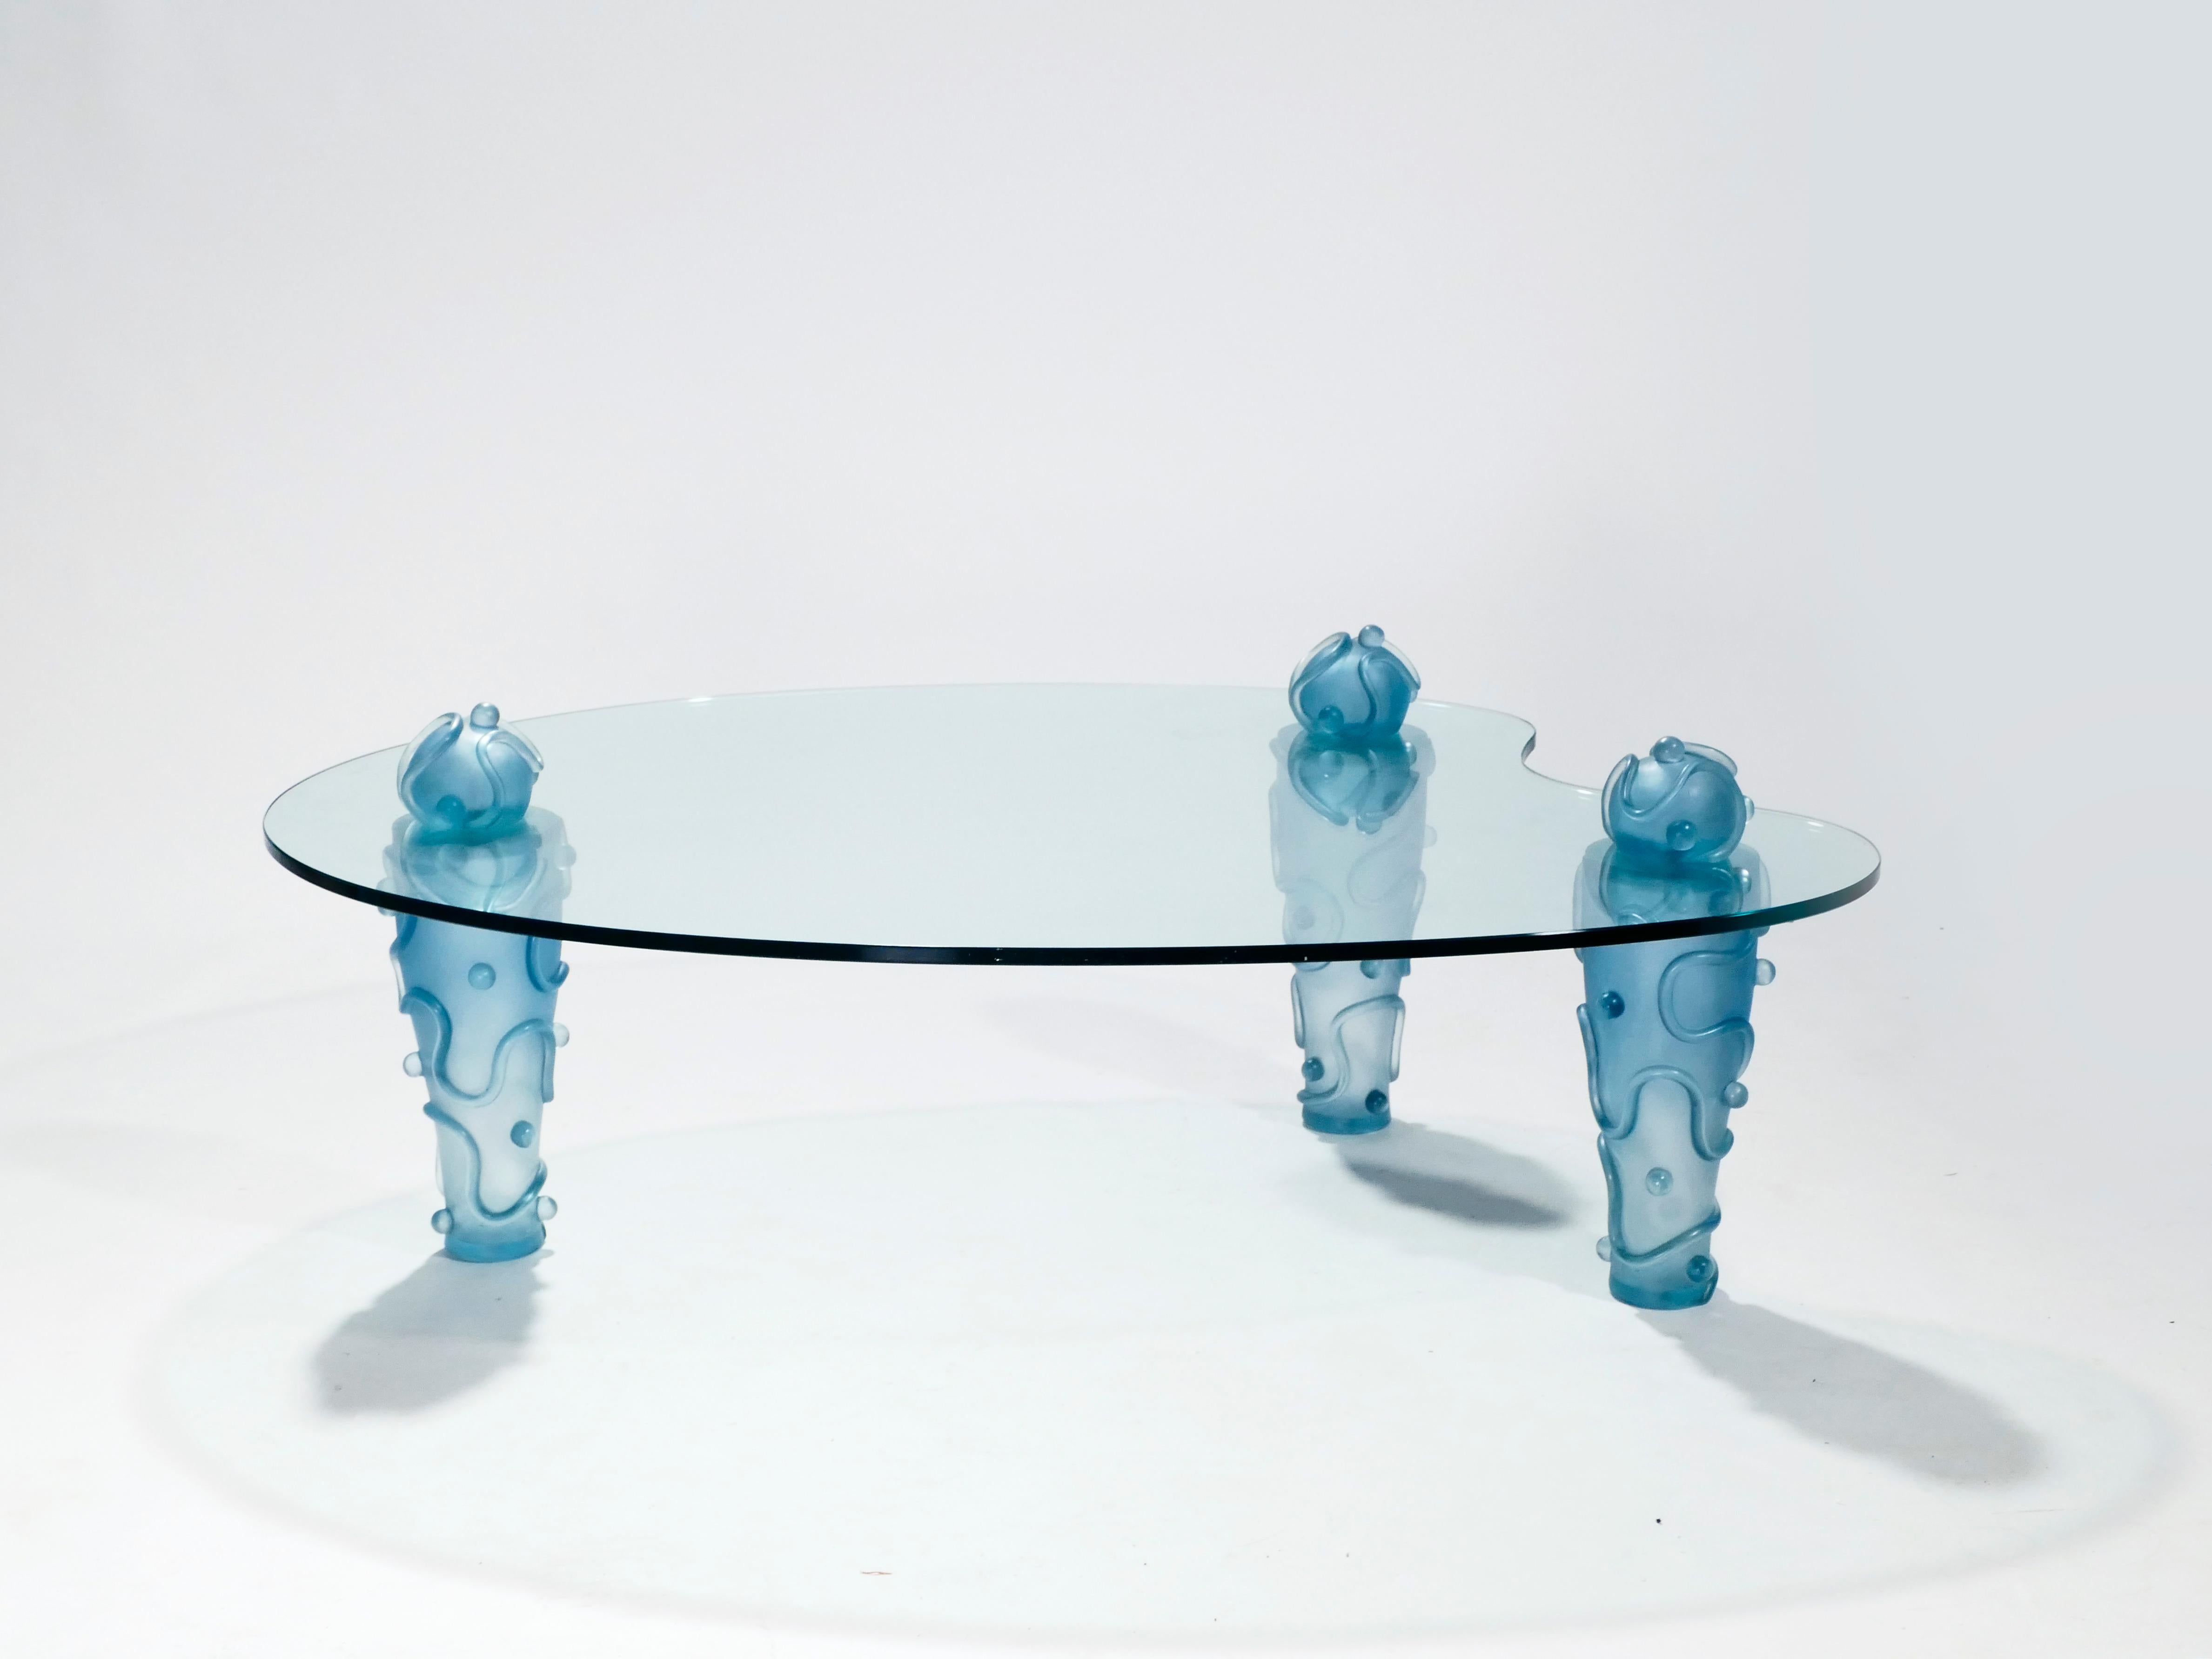 Cool colors, asymmetry, and a fanciful design make this 1990s coffee table a statement piece, especially for those that believe passionate expressions of creativity go hand-in-hand with interior design. Elizabeth Garouste & Mattia Bonetti are a team